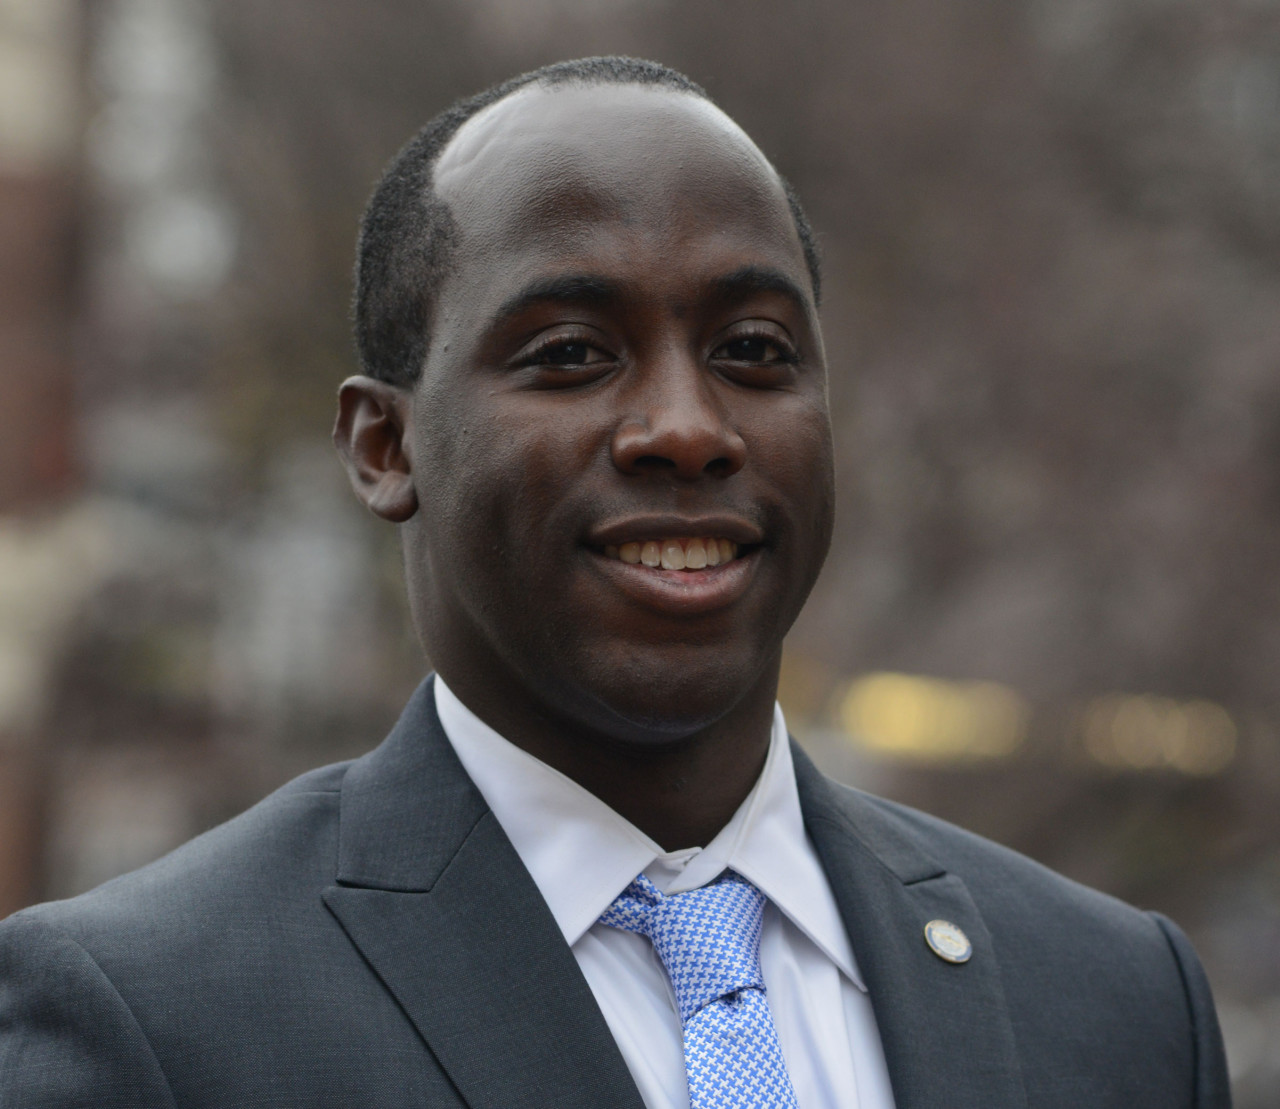 Shaun Blugh was appointed Boston's first ever Chief Diversity Officer to oversee the Mayor's Office of Diversity, which aims to increase diversity in the city’s workforce. (City of Boston)